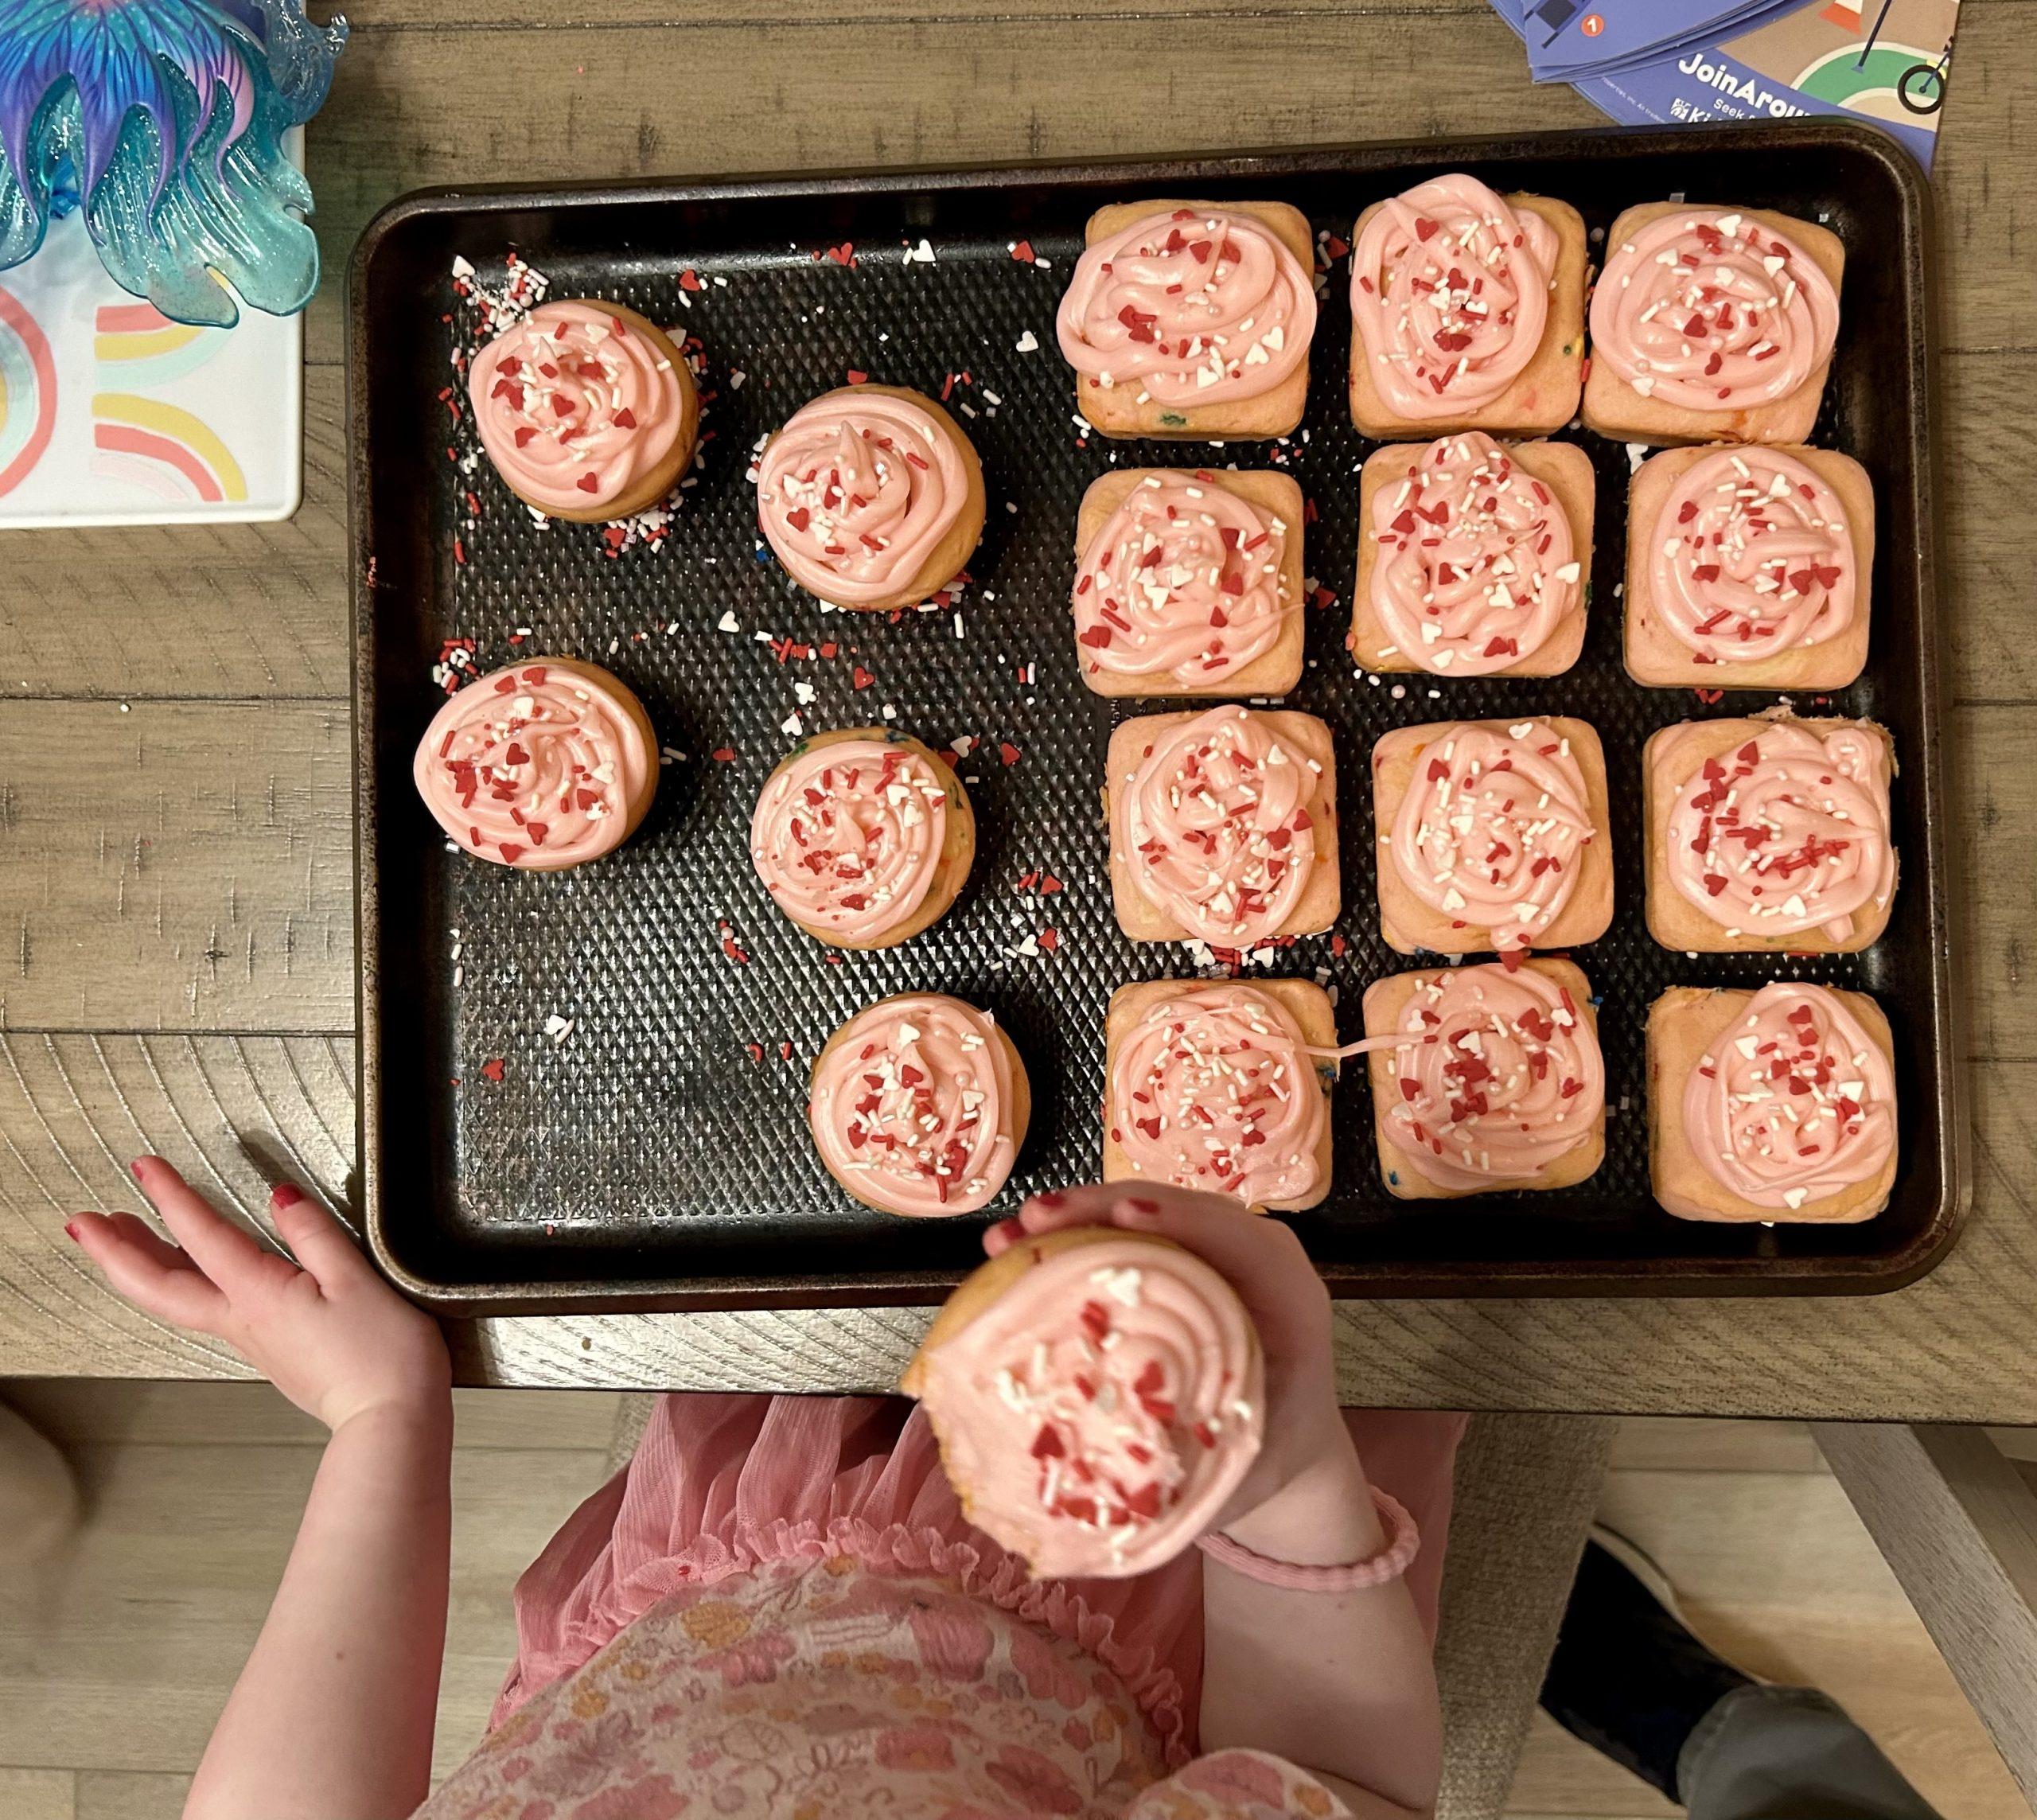 From Cookies To Crafts :: Creating Sweet Memories With Your Child This Valentine's Day